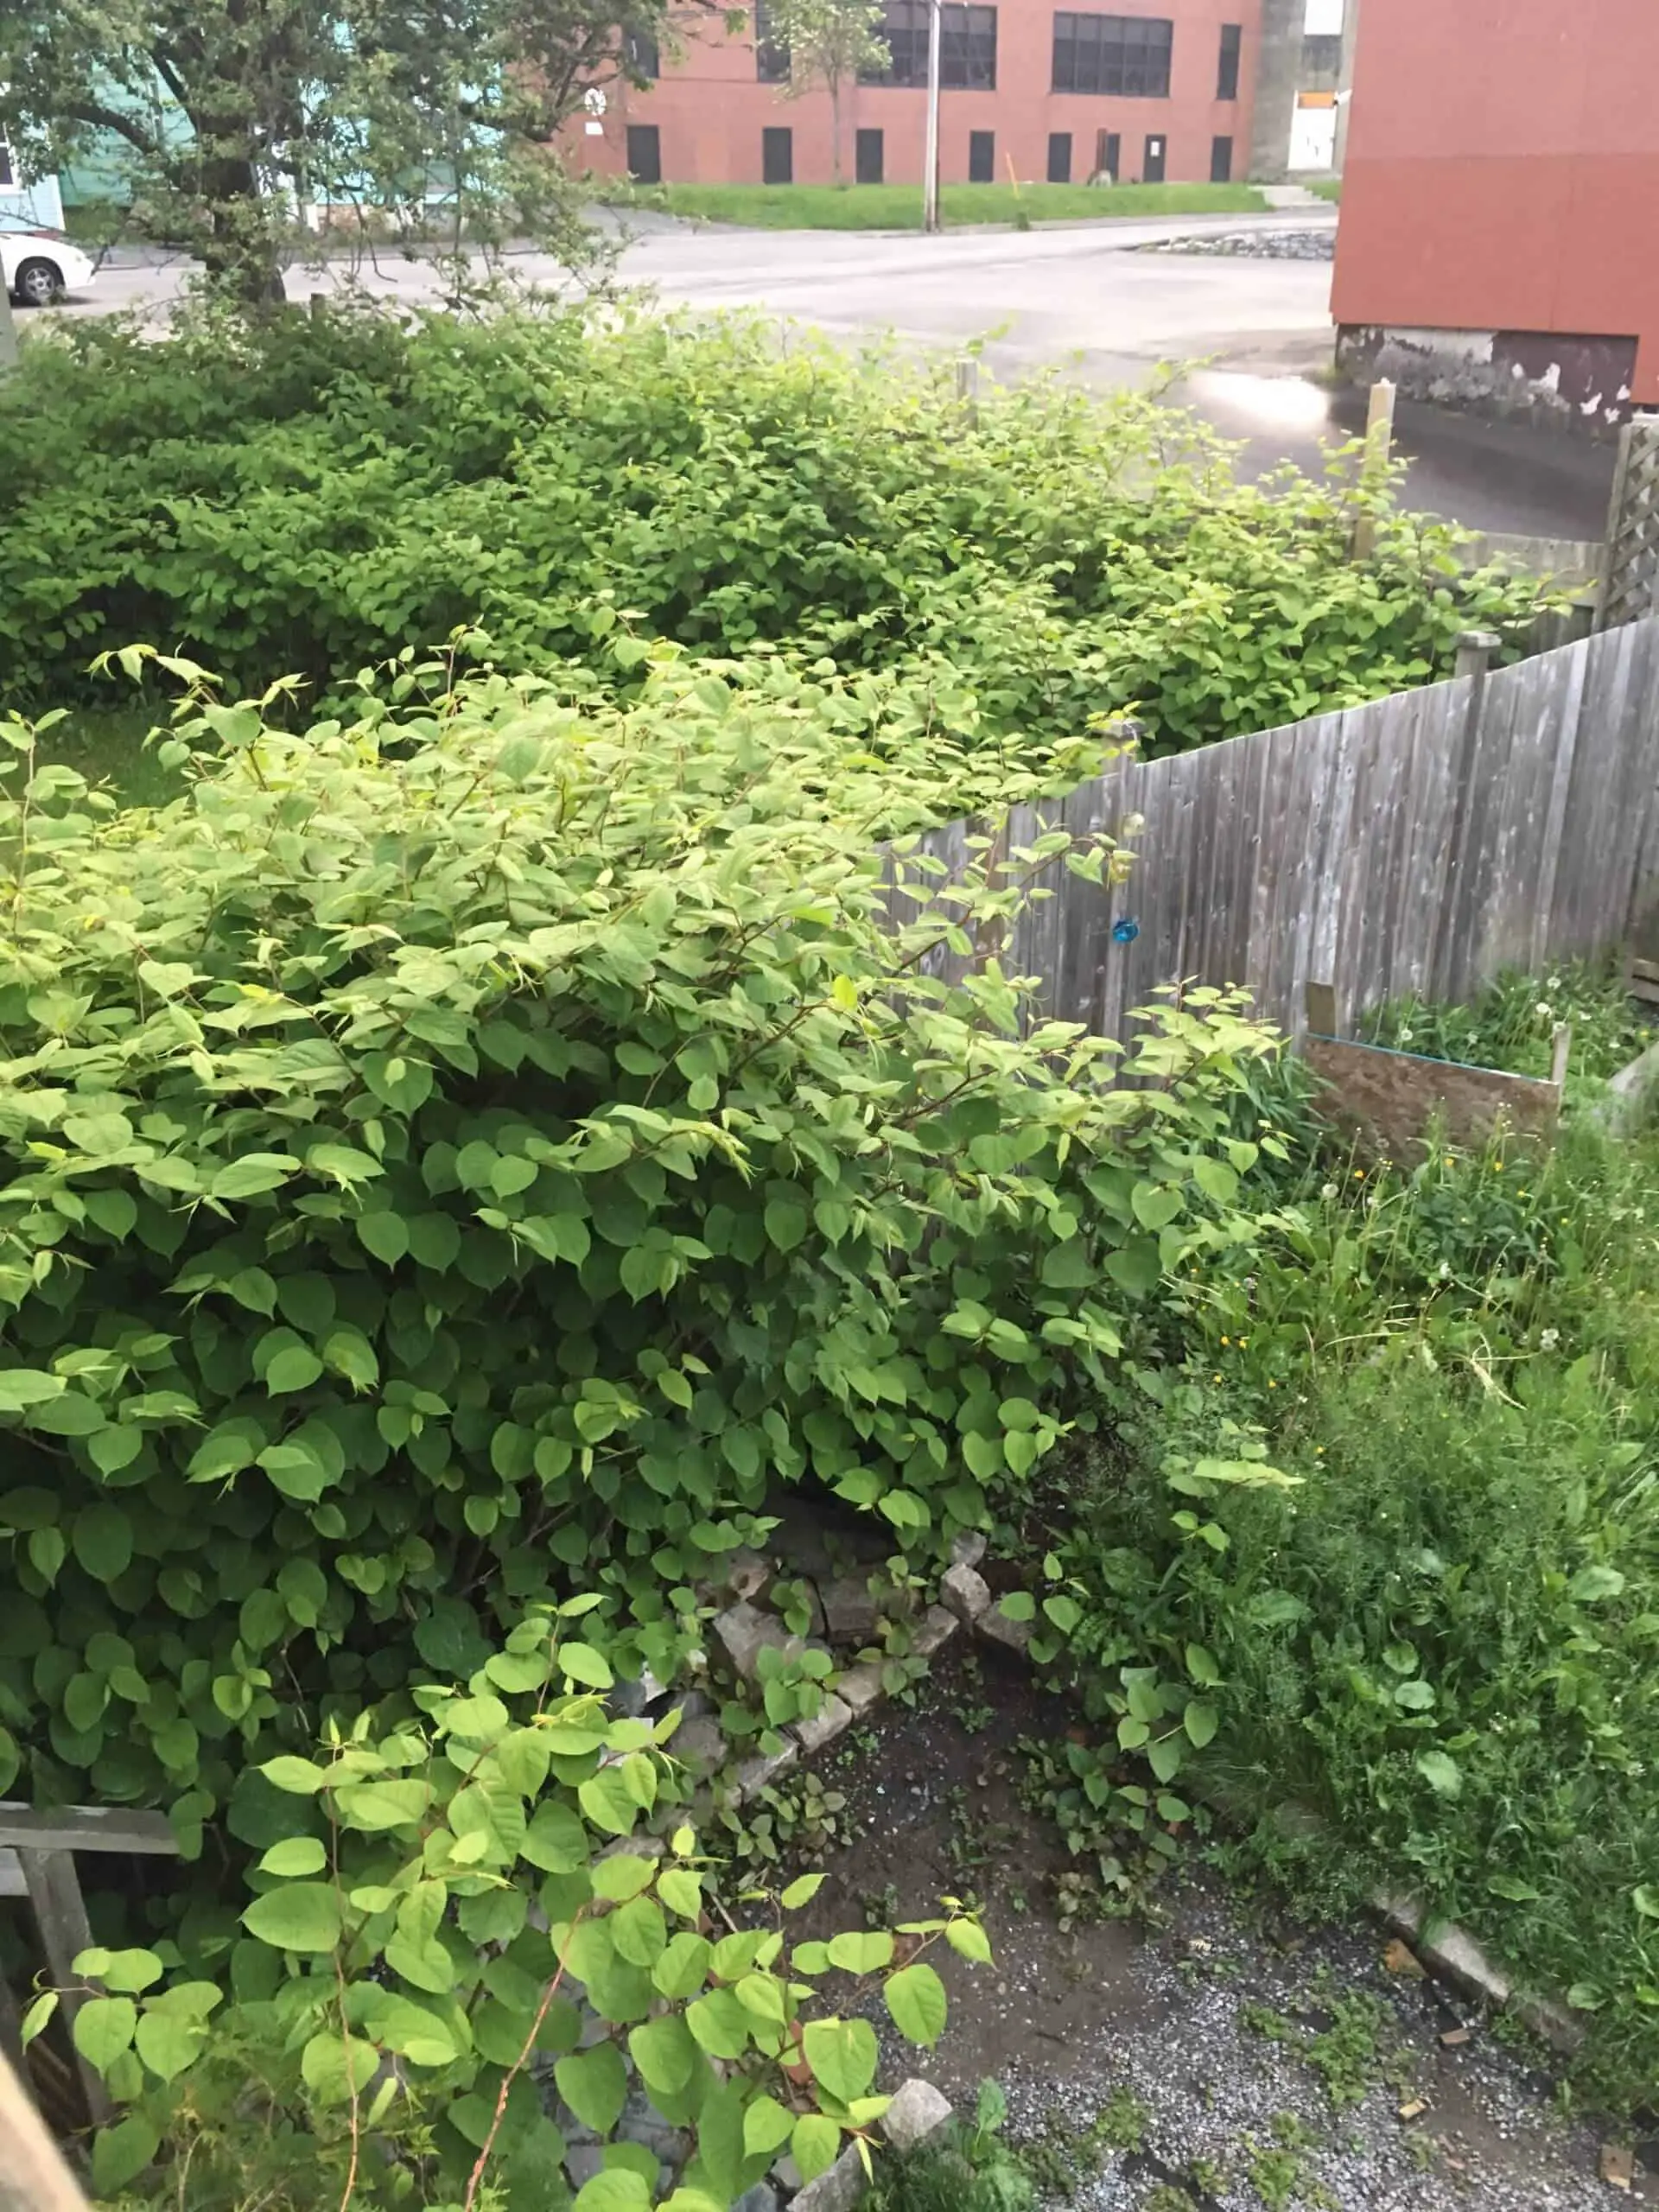 Japanese knotweed can cross boundaries and cause legal disputes between property owners